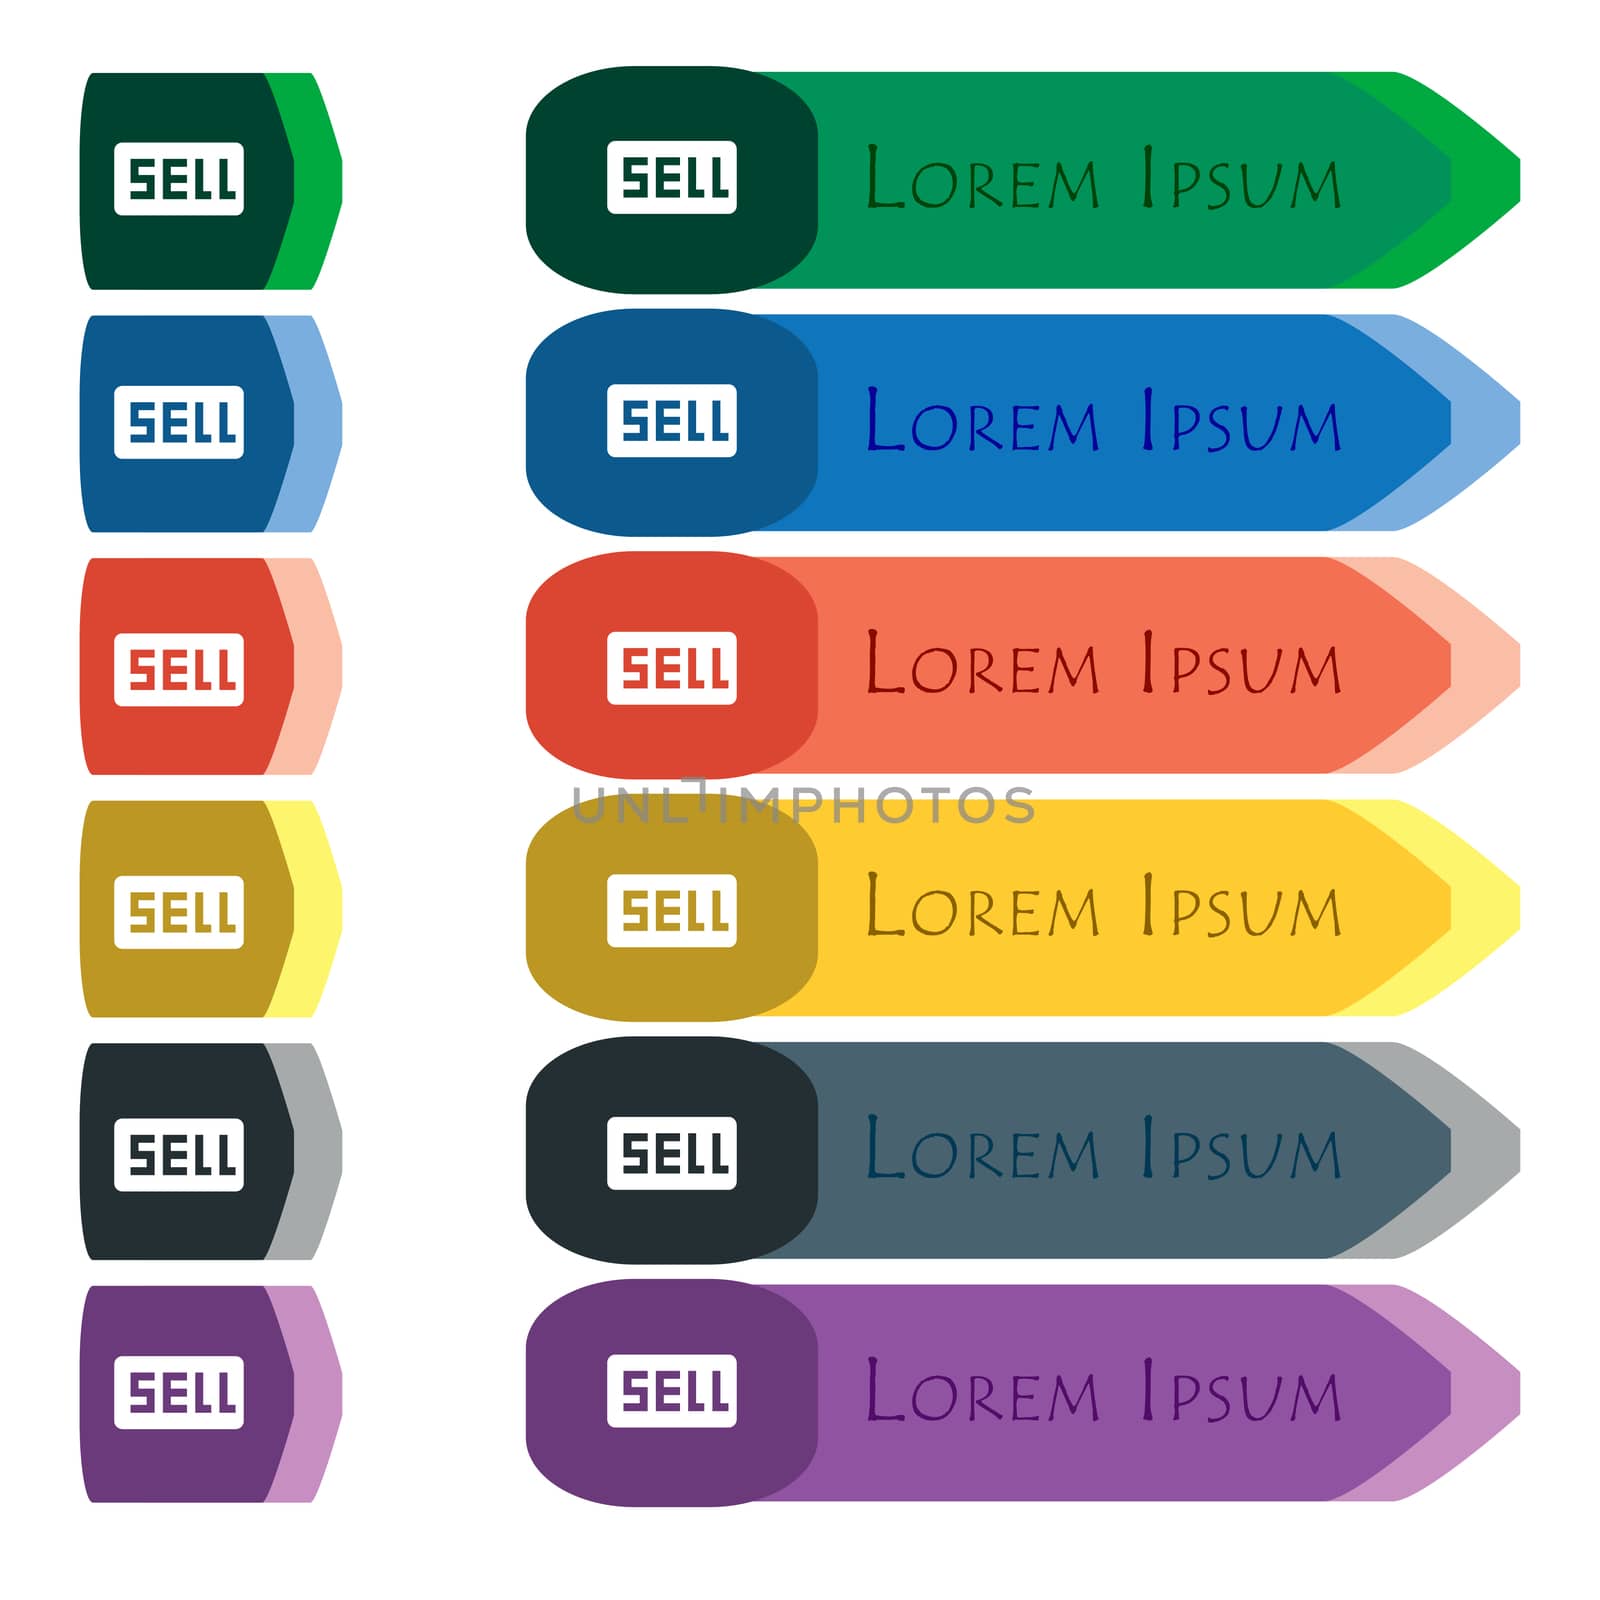 Sell, Contributor earnings icon sign. Set of colorful, bright long buttons with additional small modules. Flat design. 